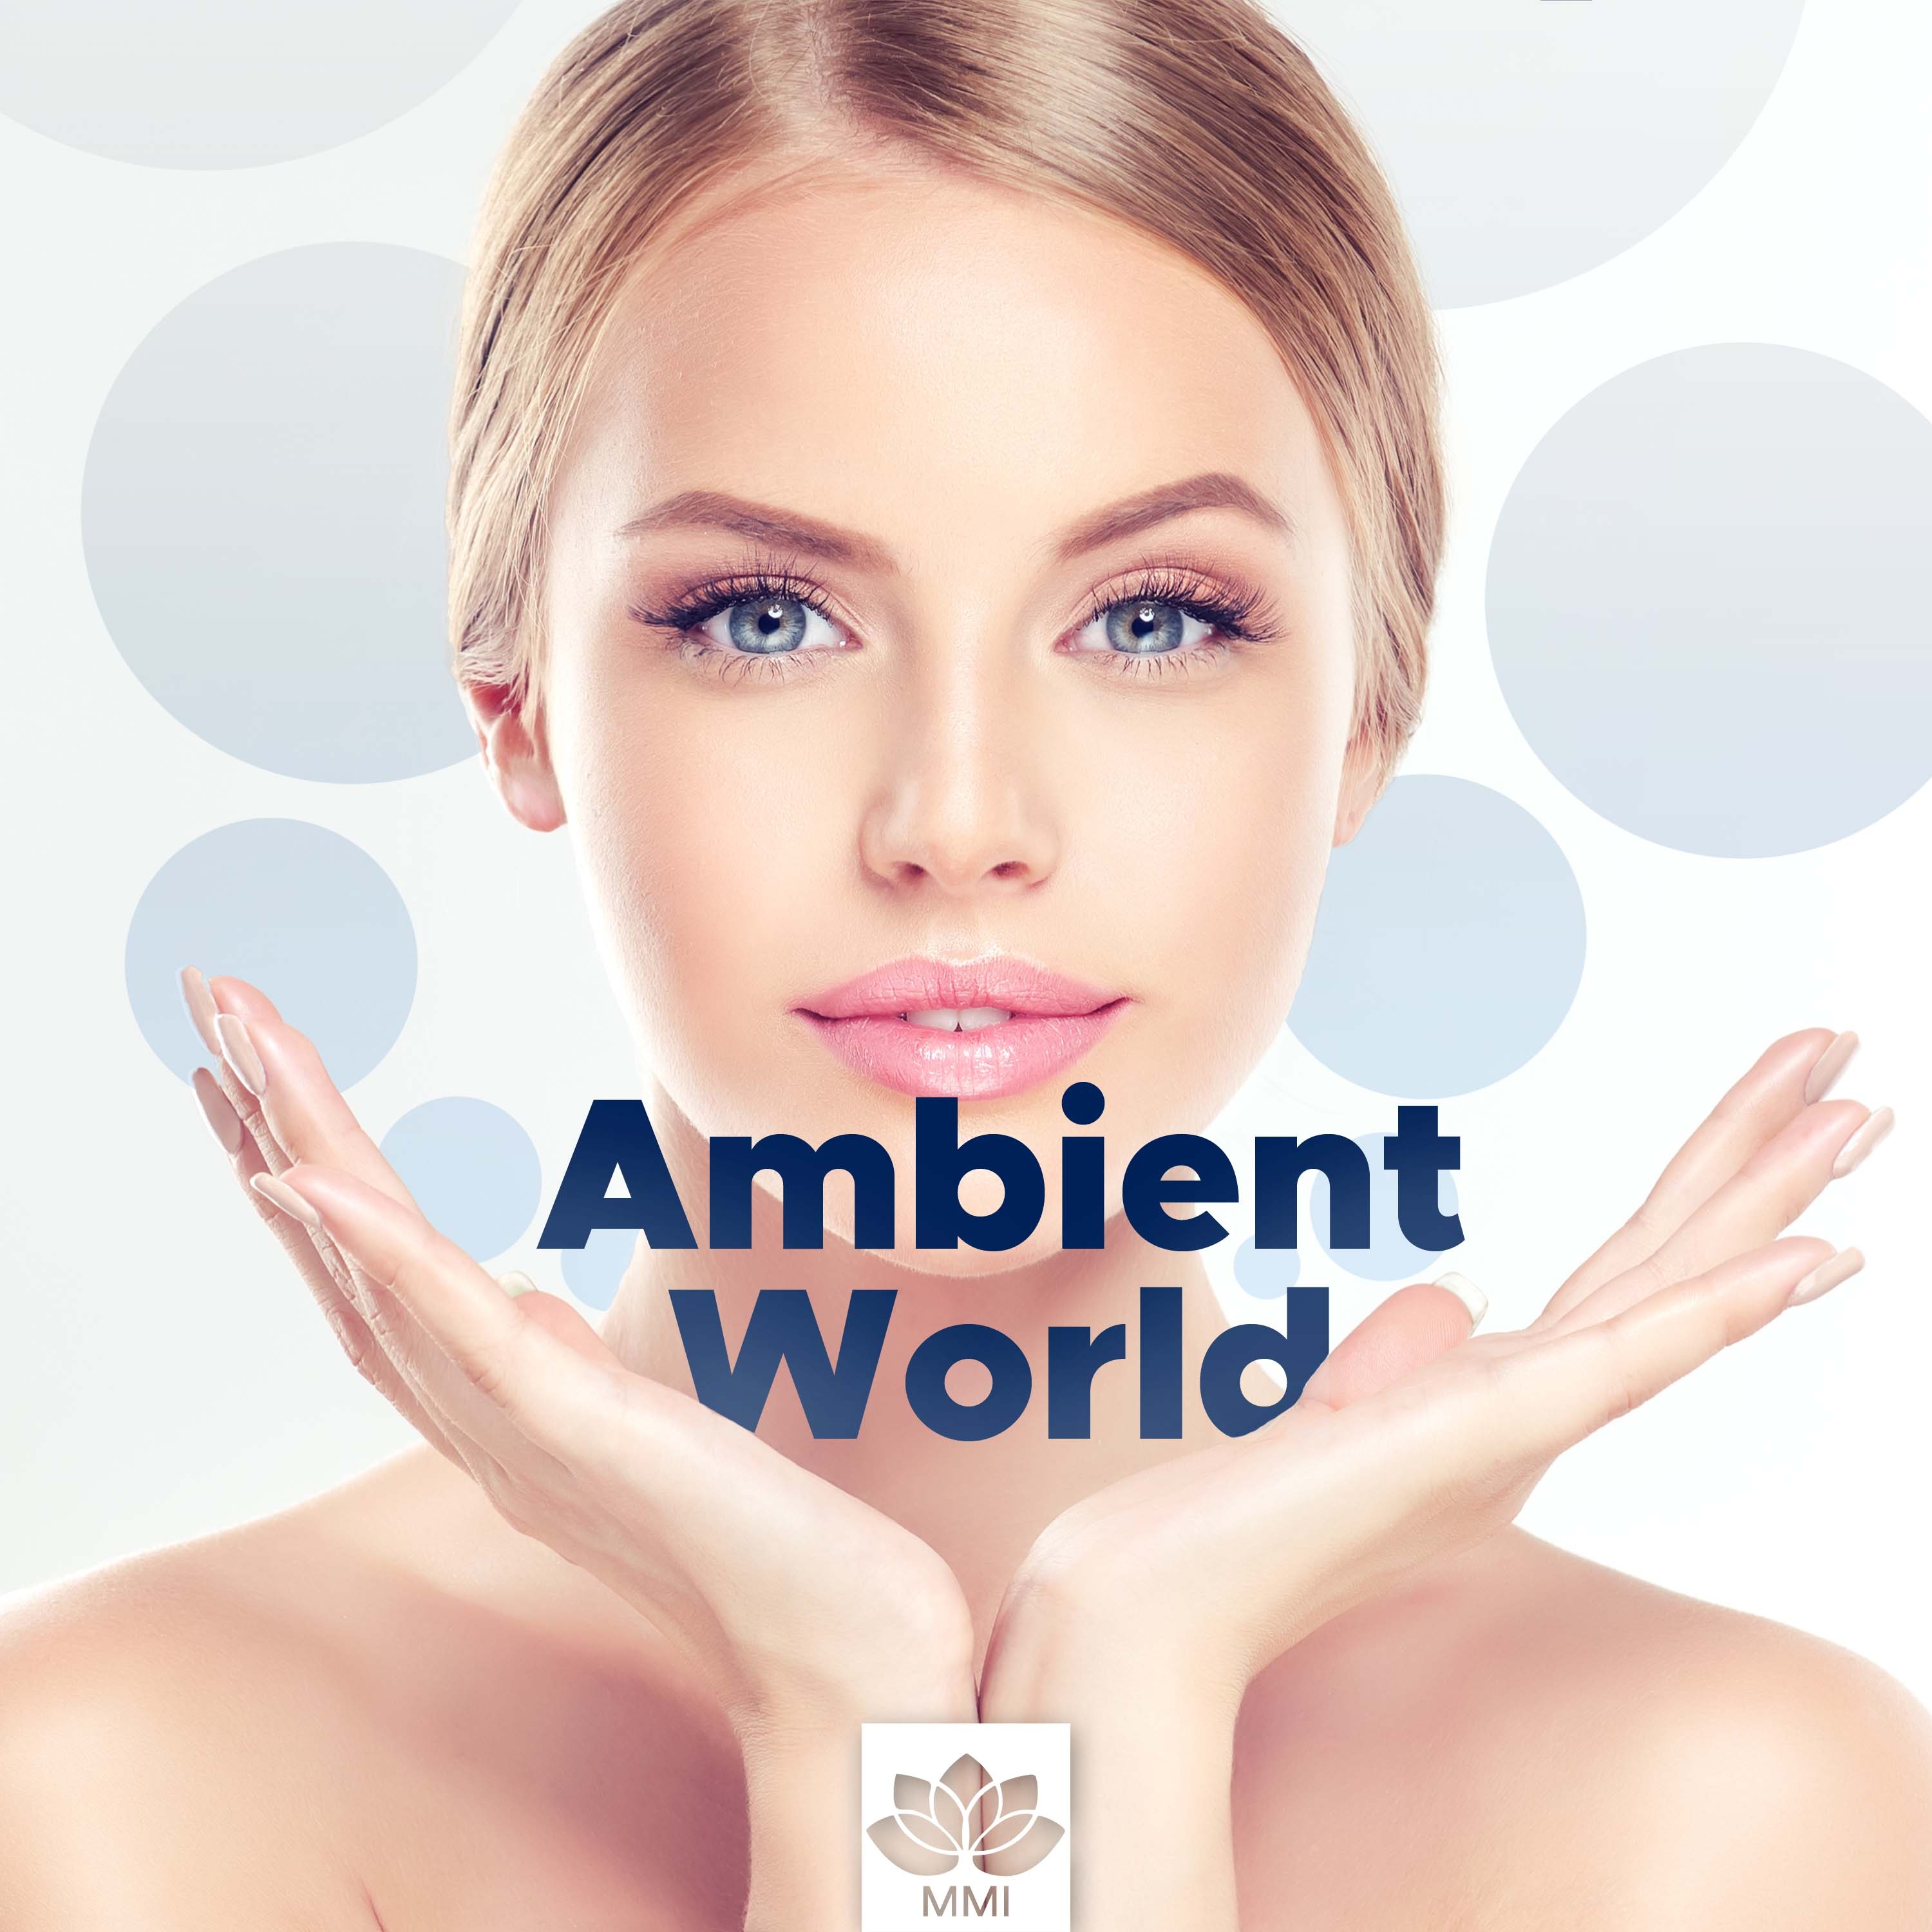 Ambient World - New Age Relaxing Music for a Peaceful Mind and Body with Nature Sounds (Rain, Ocean Waves, Wind and more)